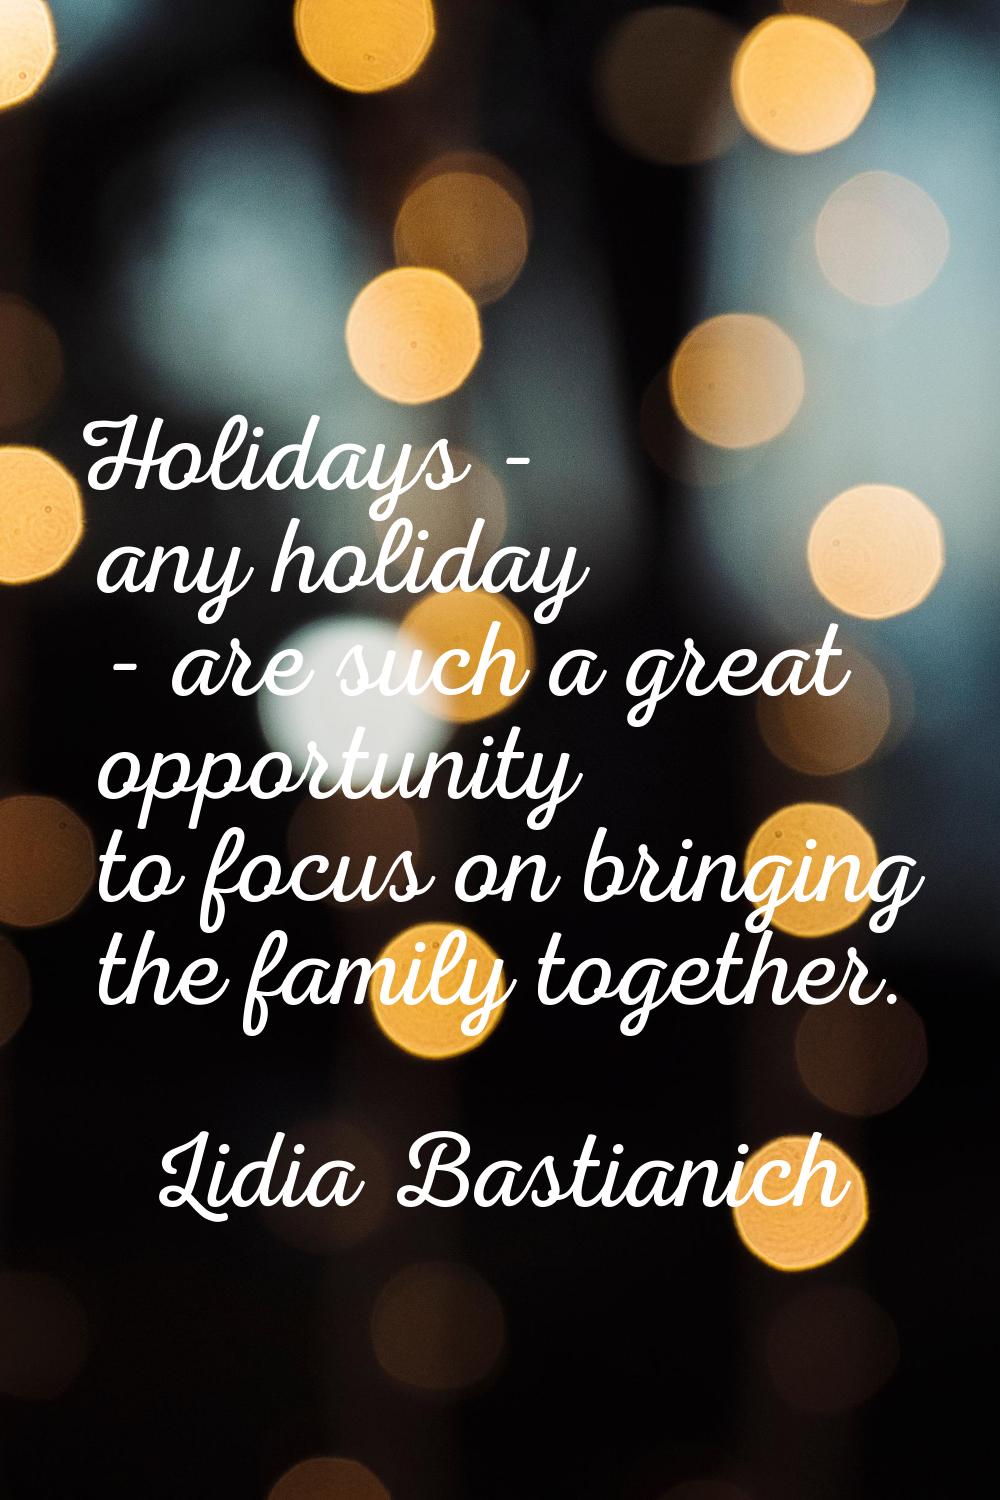 Holidays - any holiday - are such a great opportunity to focus on bringing the family together.